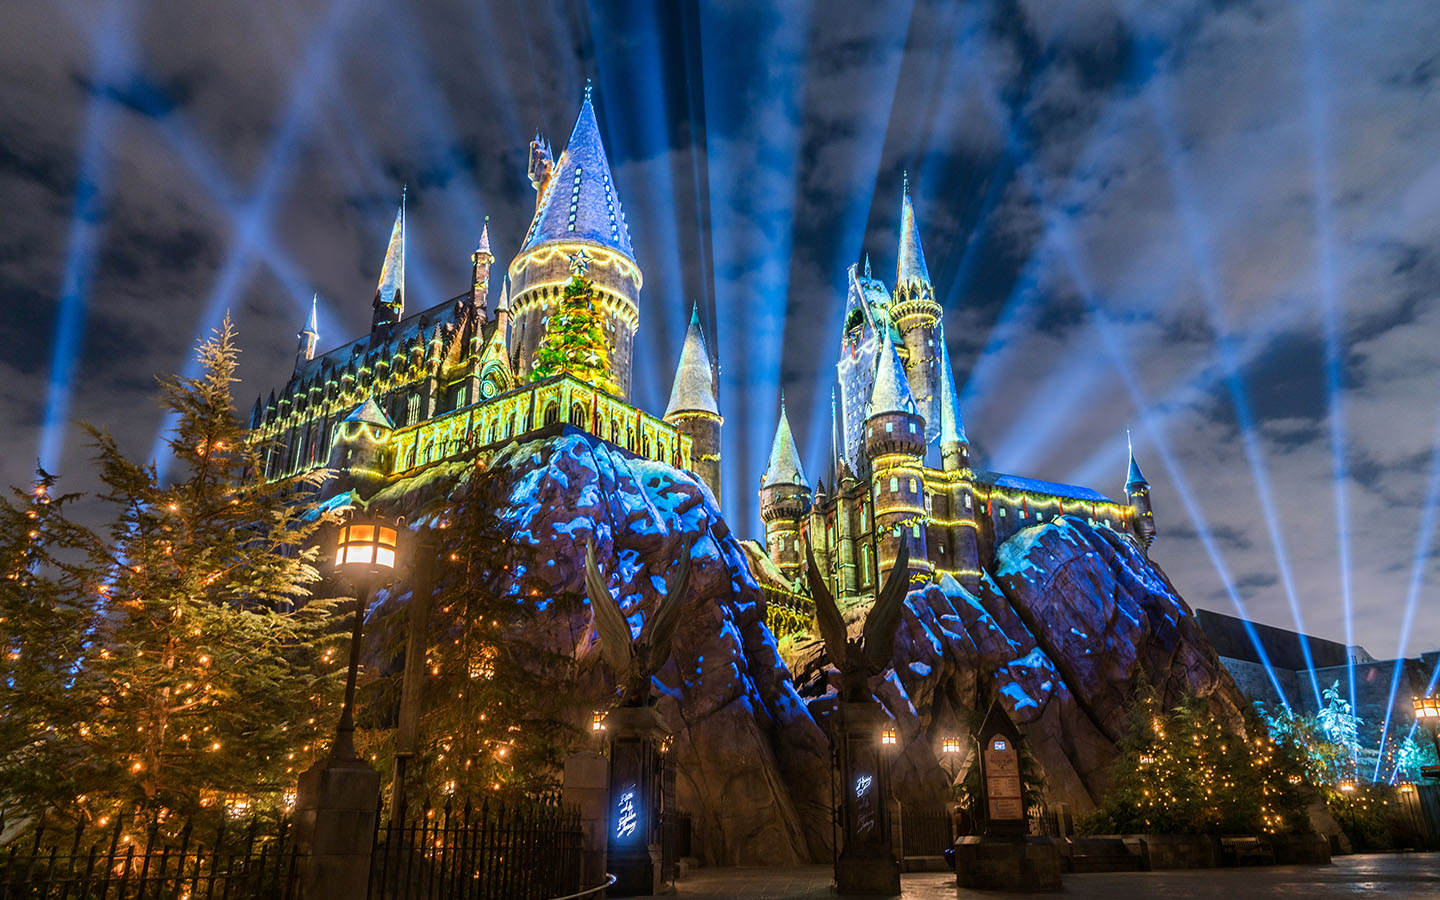 Christmas at The Wizarding World of Harry Potter